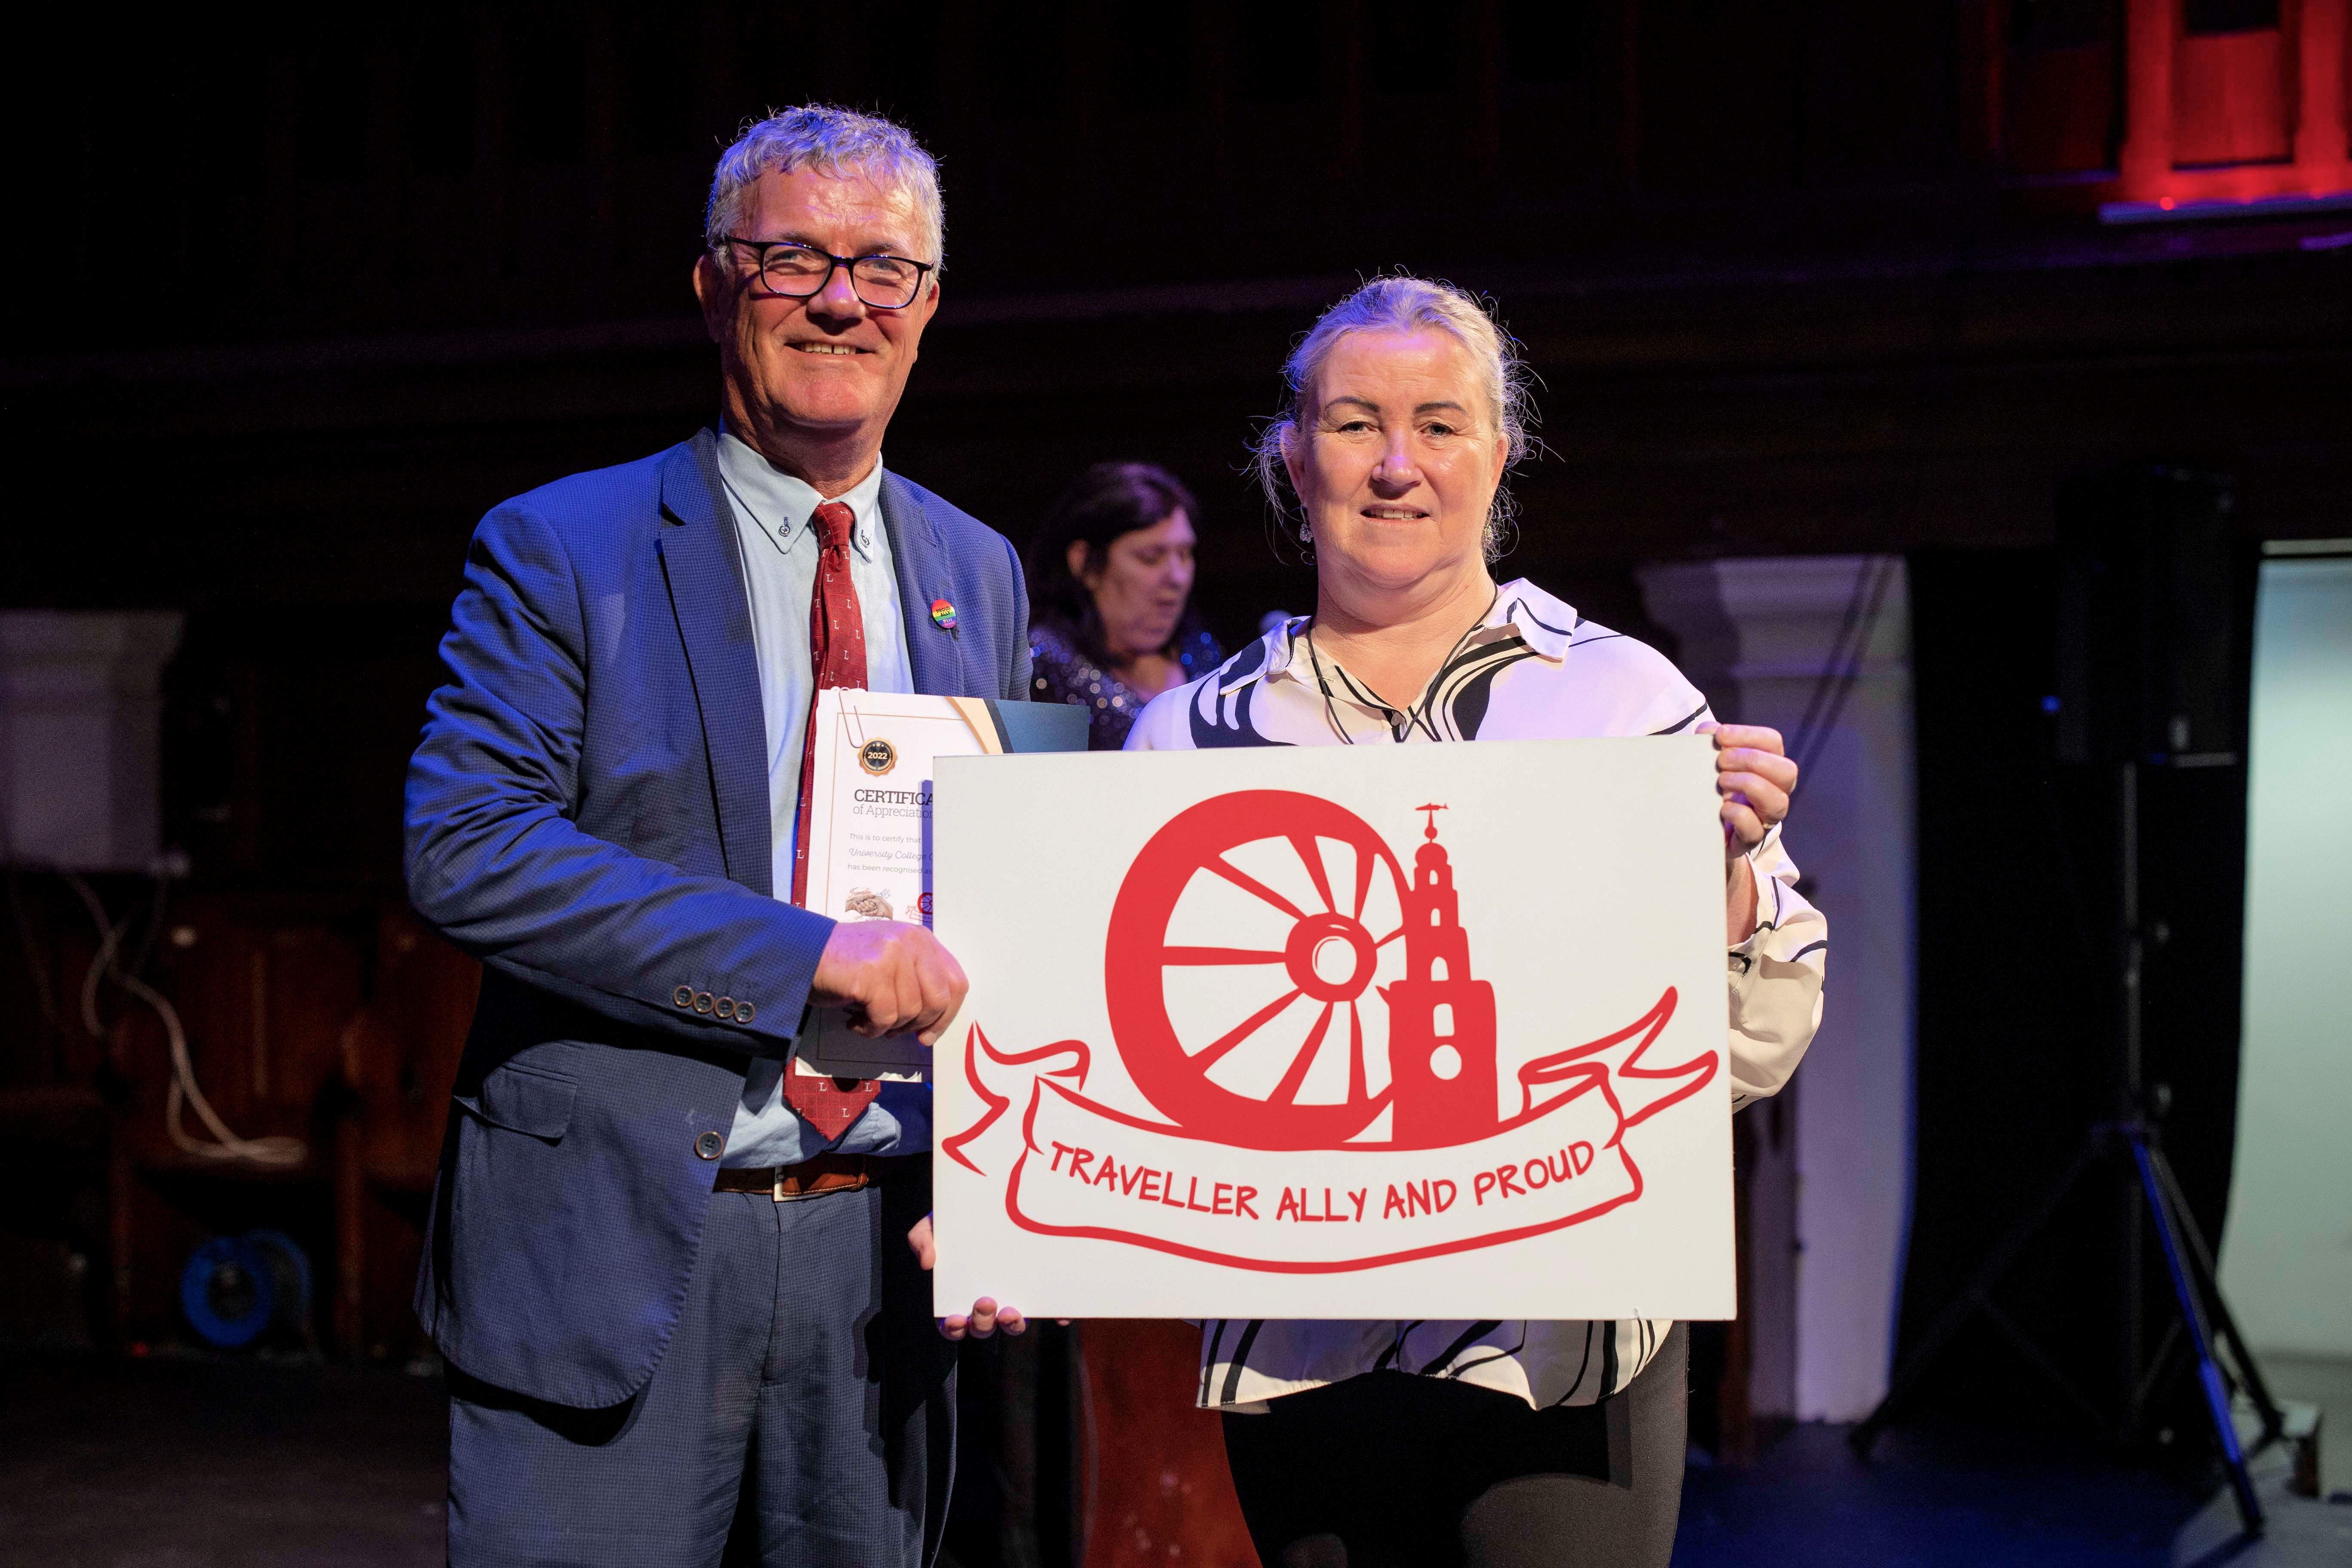 UCC and The Glucksman honoured at Traveller Ally Awards Ceremony